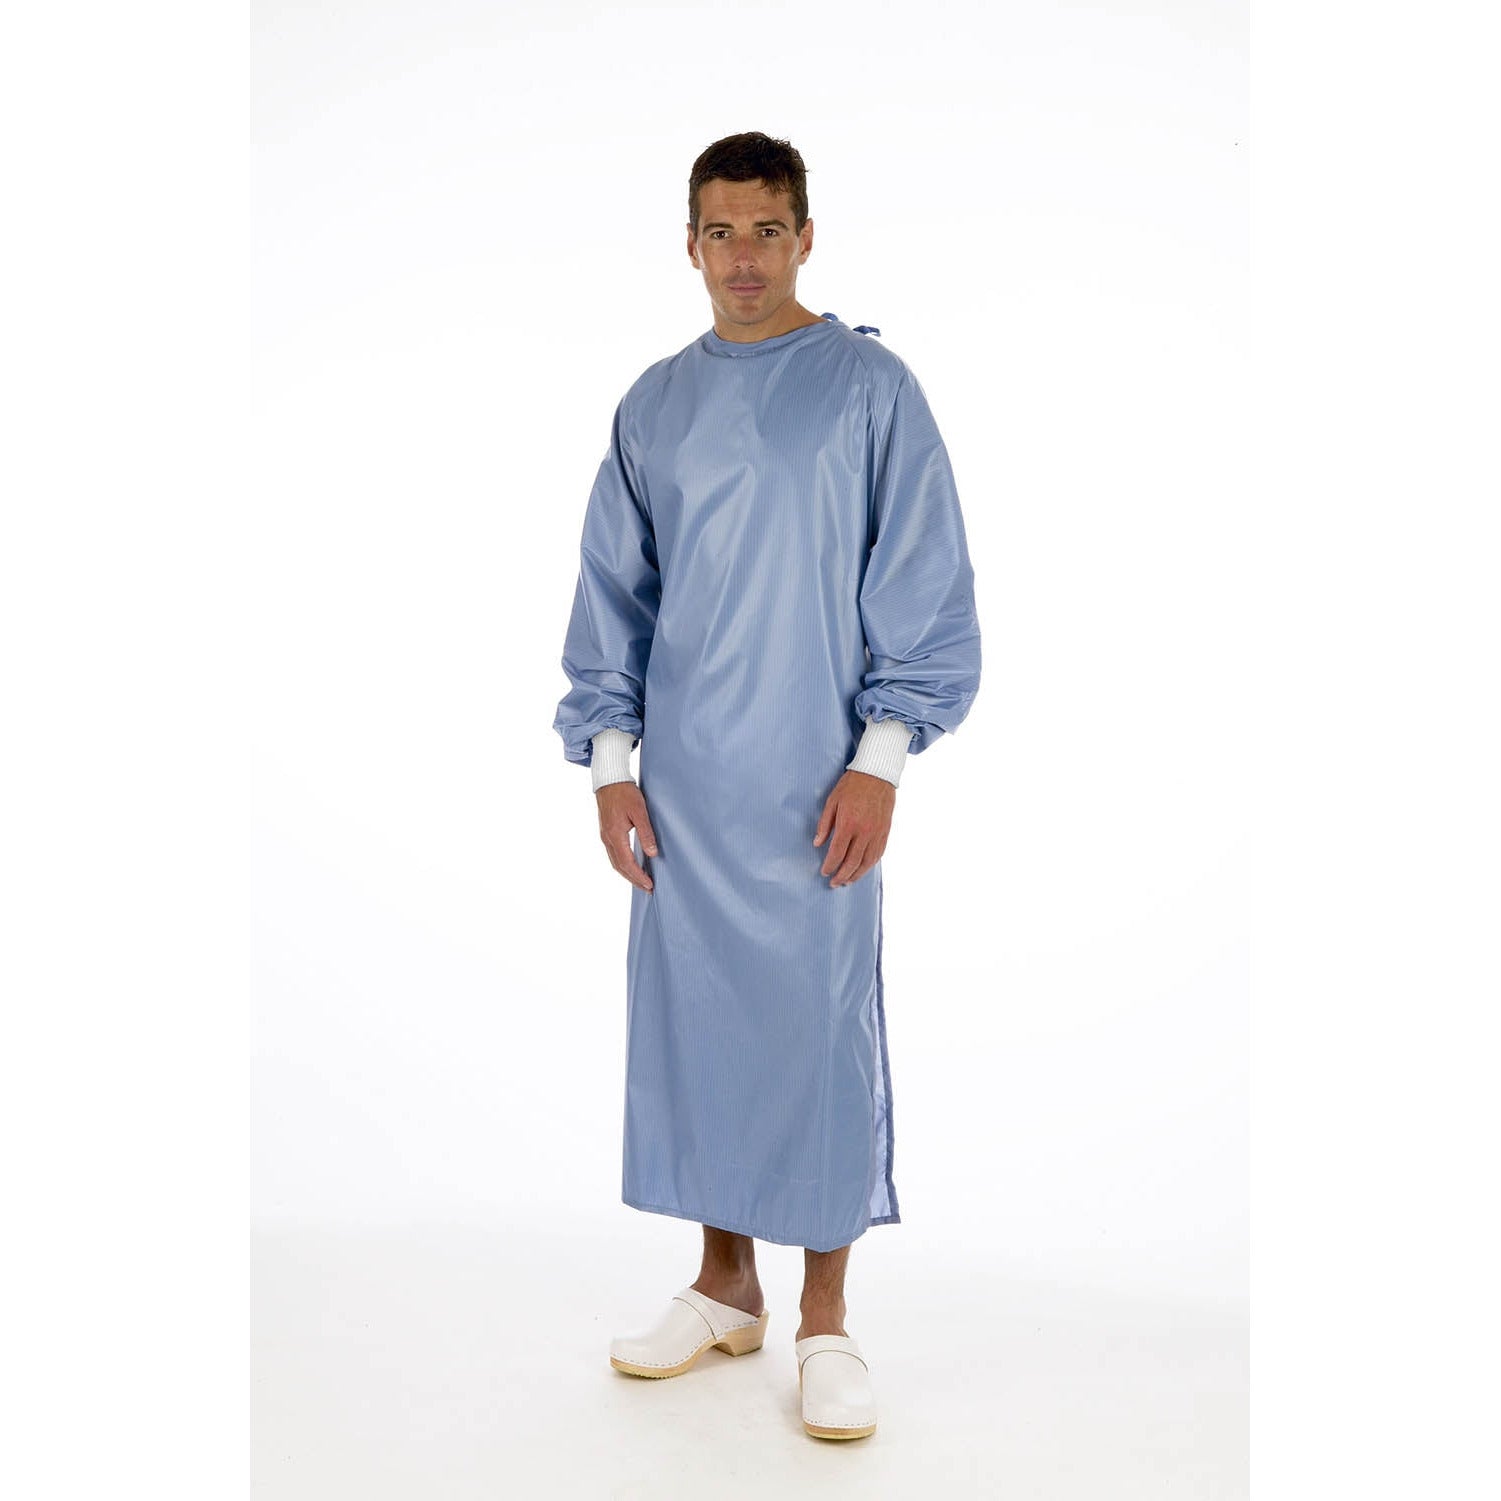 Reinforced gown sms 35g